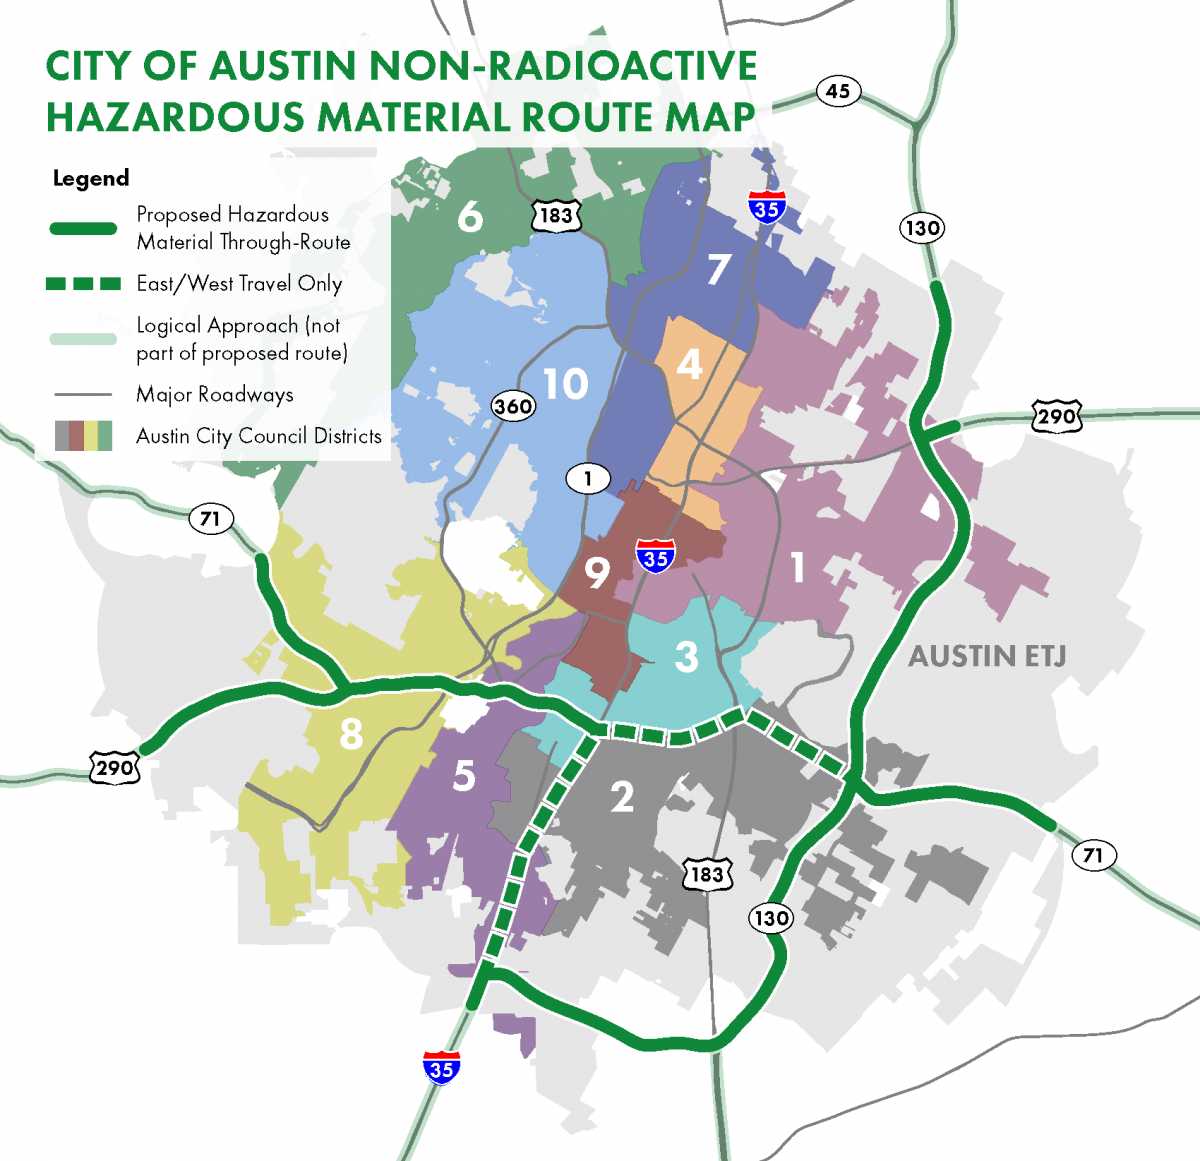 Map of the proposed route for non-radioactive hazardous materials for Austin with an overlay of City Council districts.